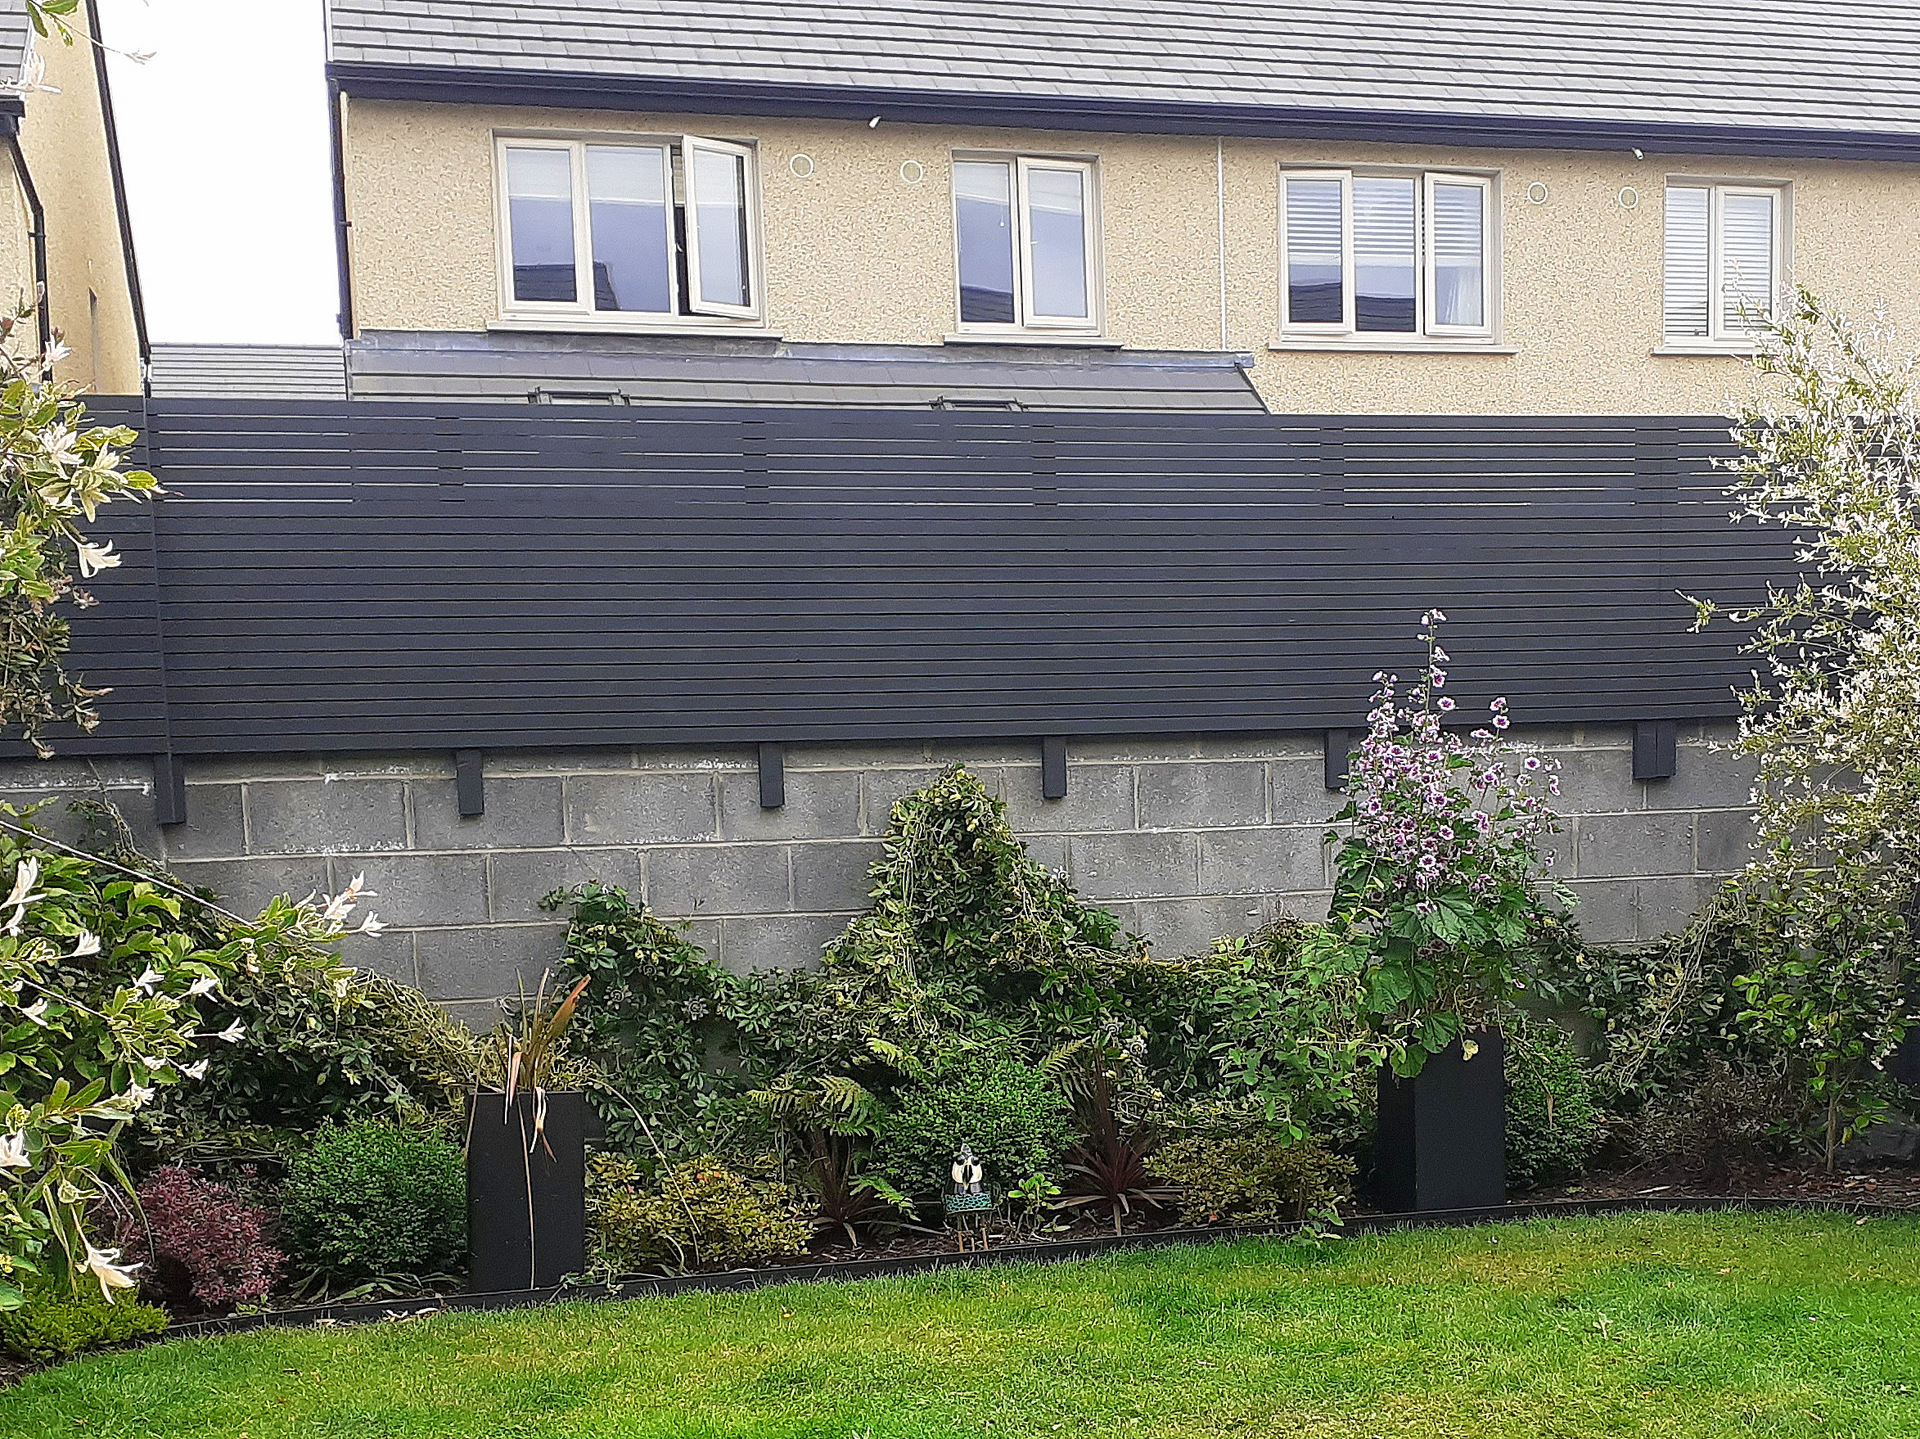 Custom made Timber Fencing featuring timber slats with painted (Colourtrends) finish, supply & installation in Ballycullen, Dublin 24 | Owen Chubb Garden Landscapers